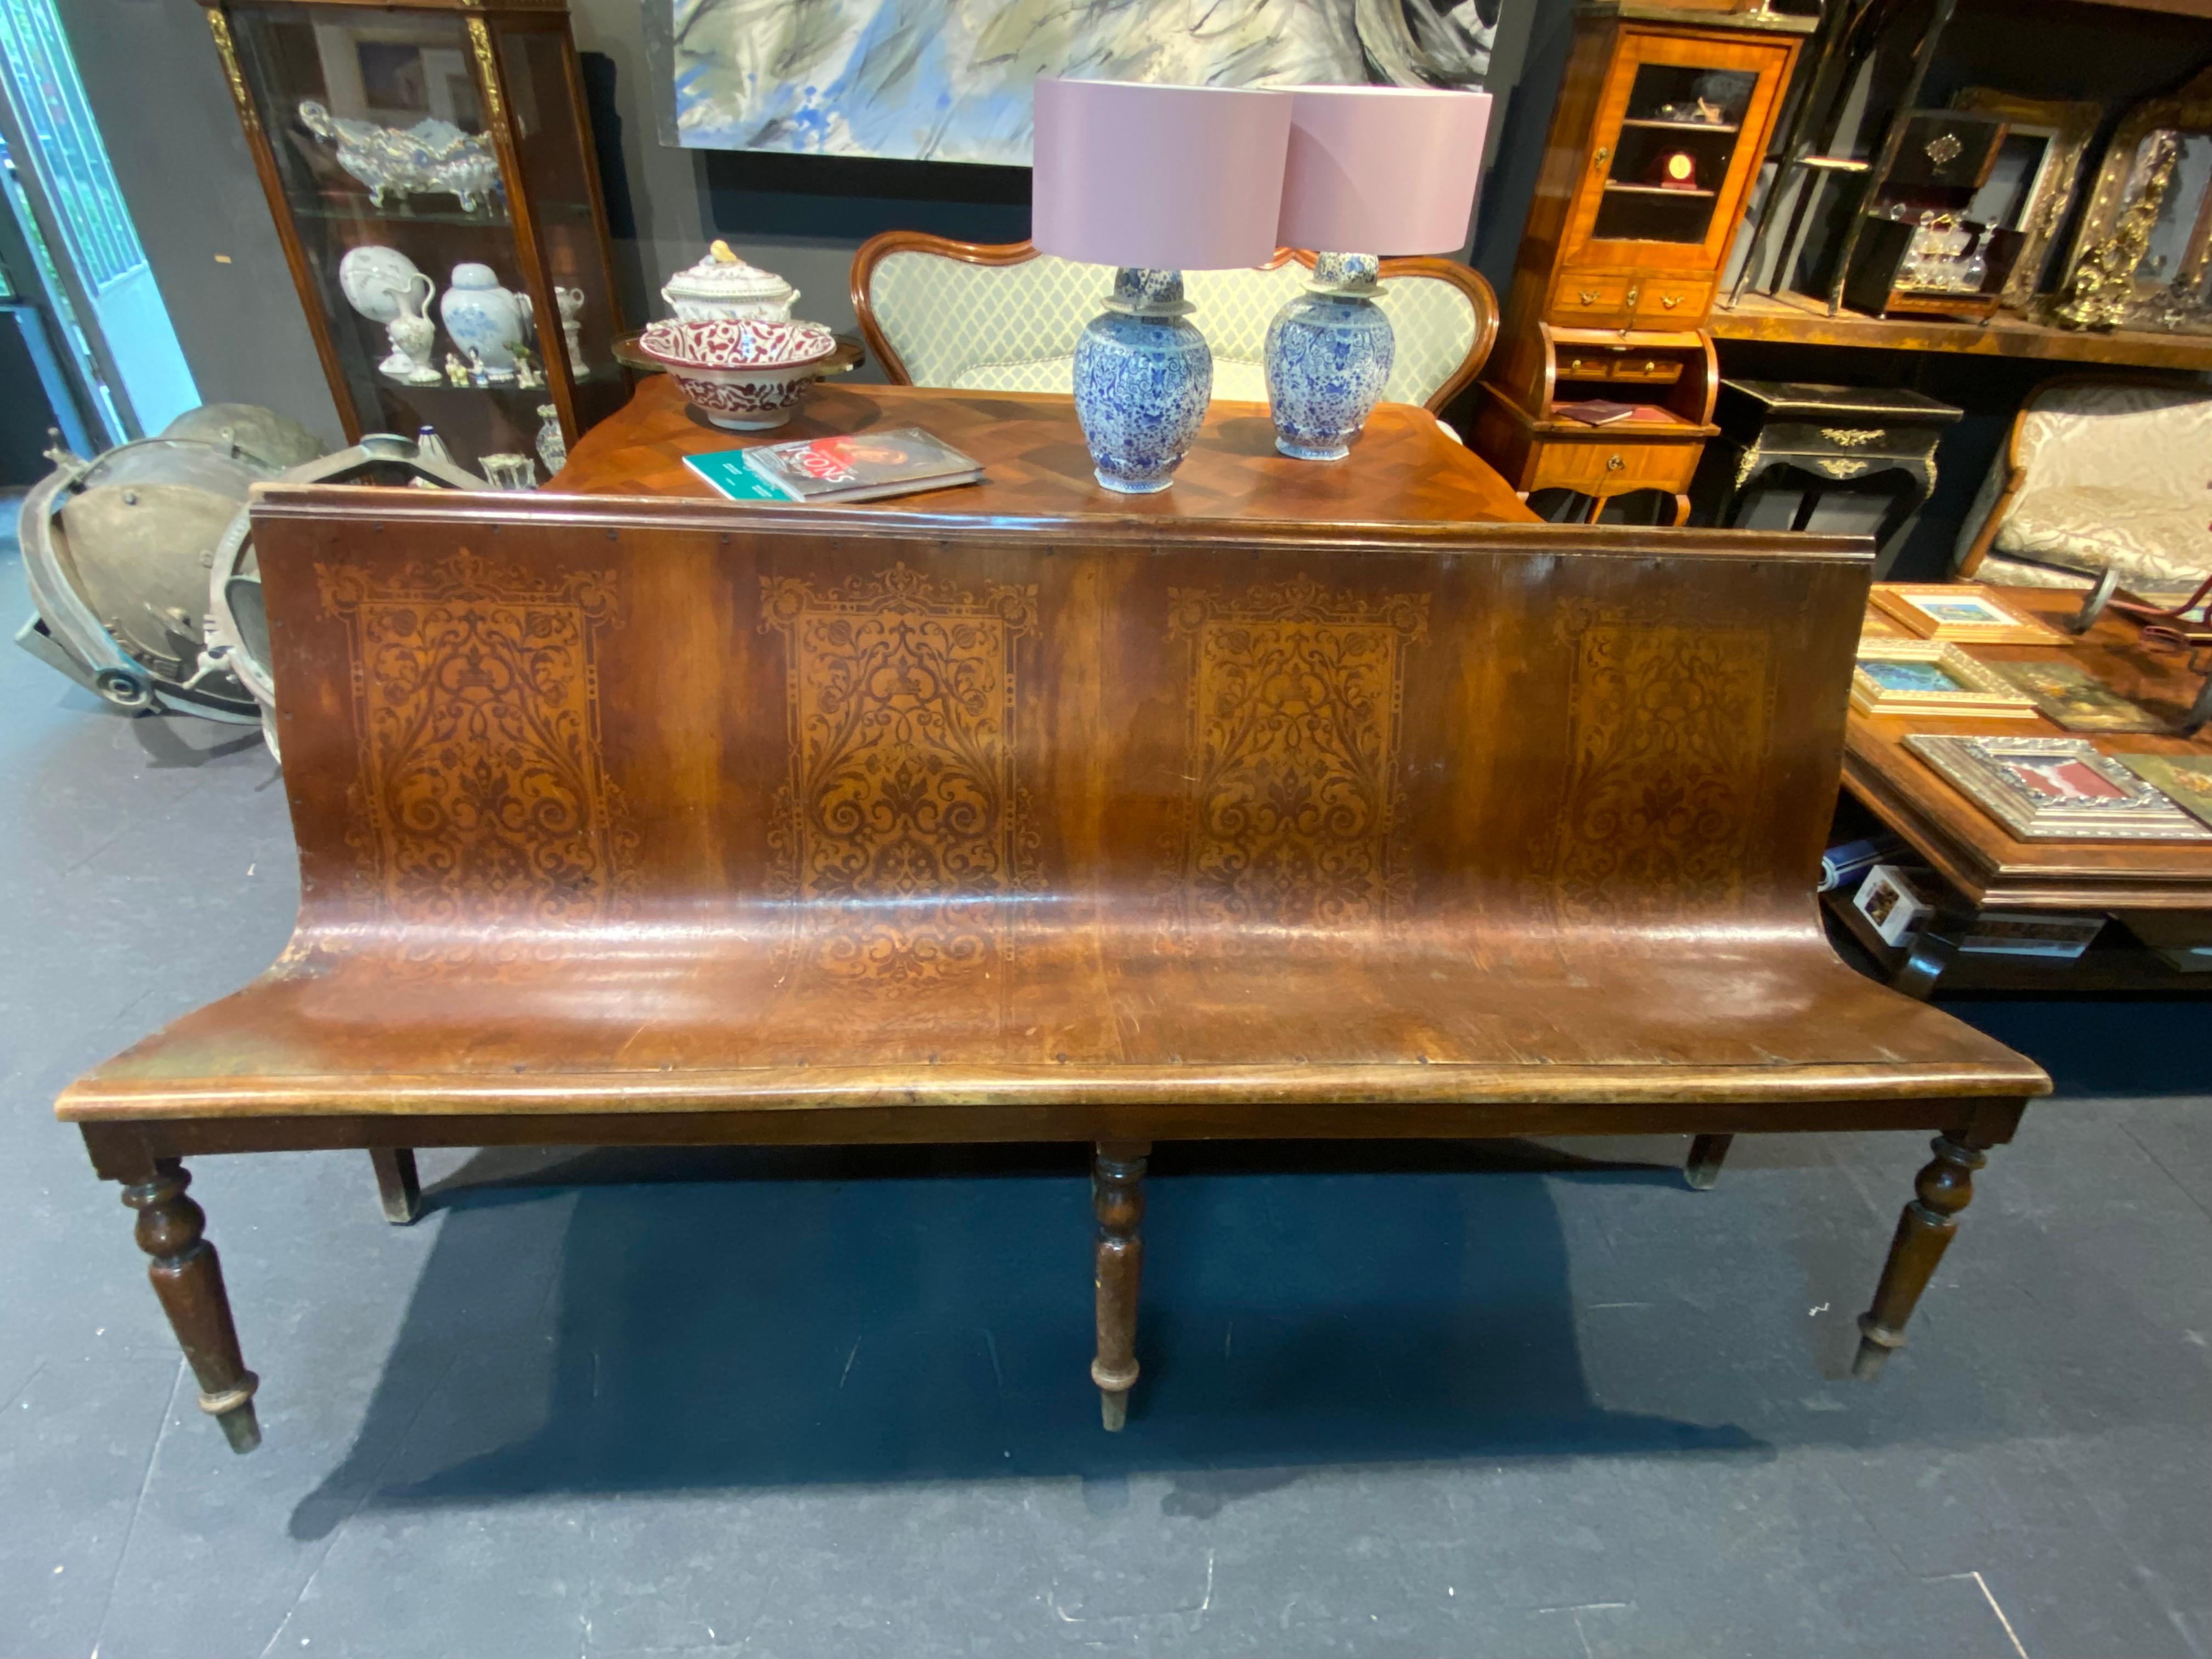 Large French benches in hand carved wood in very good authentic stable condition.
France, circa 1860